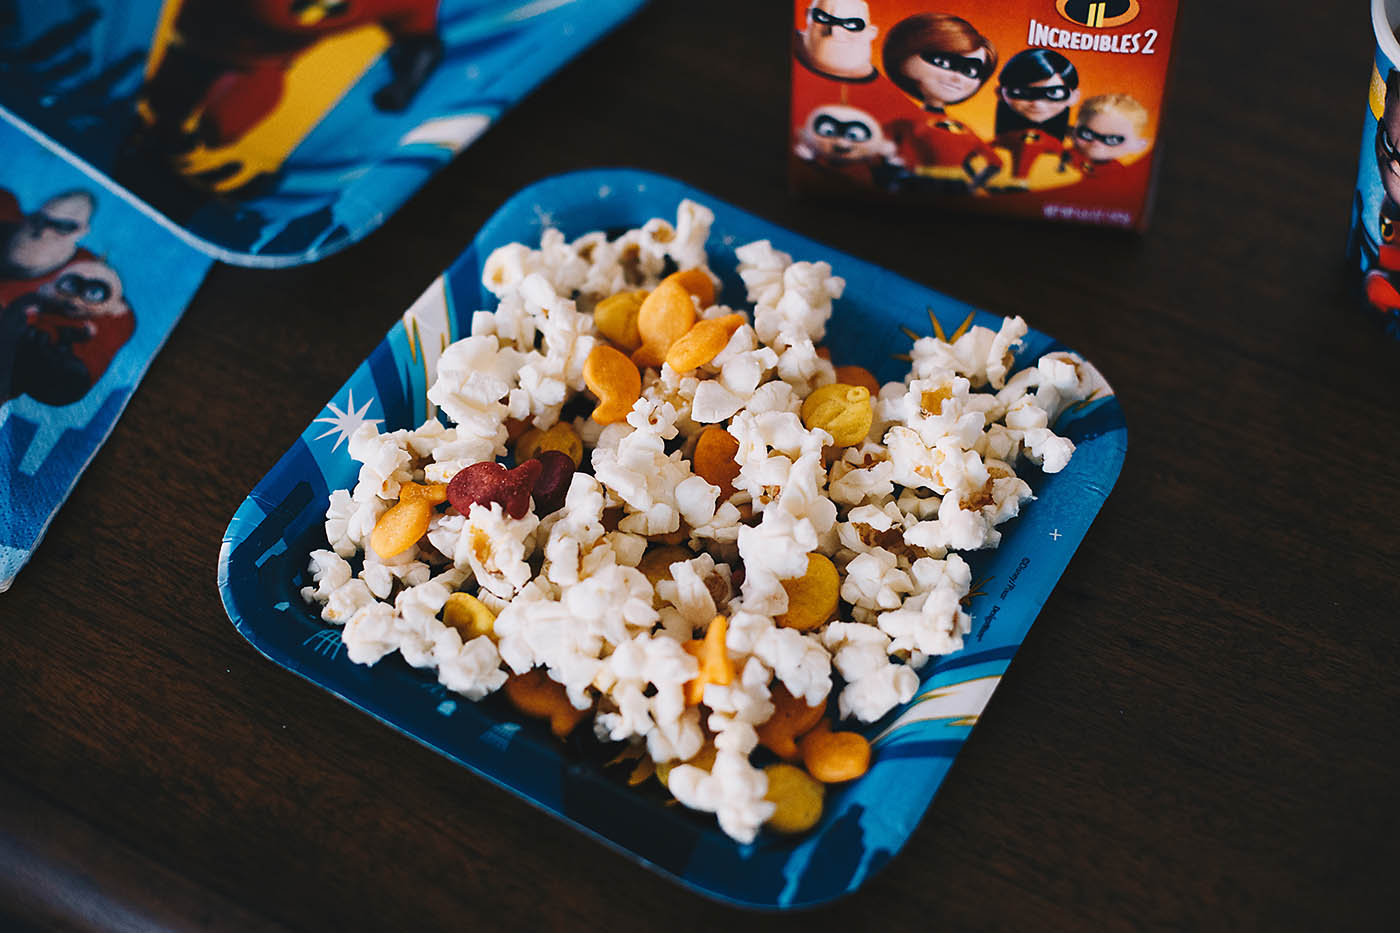 Incredibles 2 Family Movie and Game Night Ideas